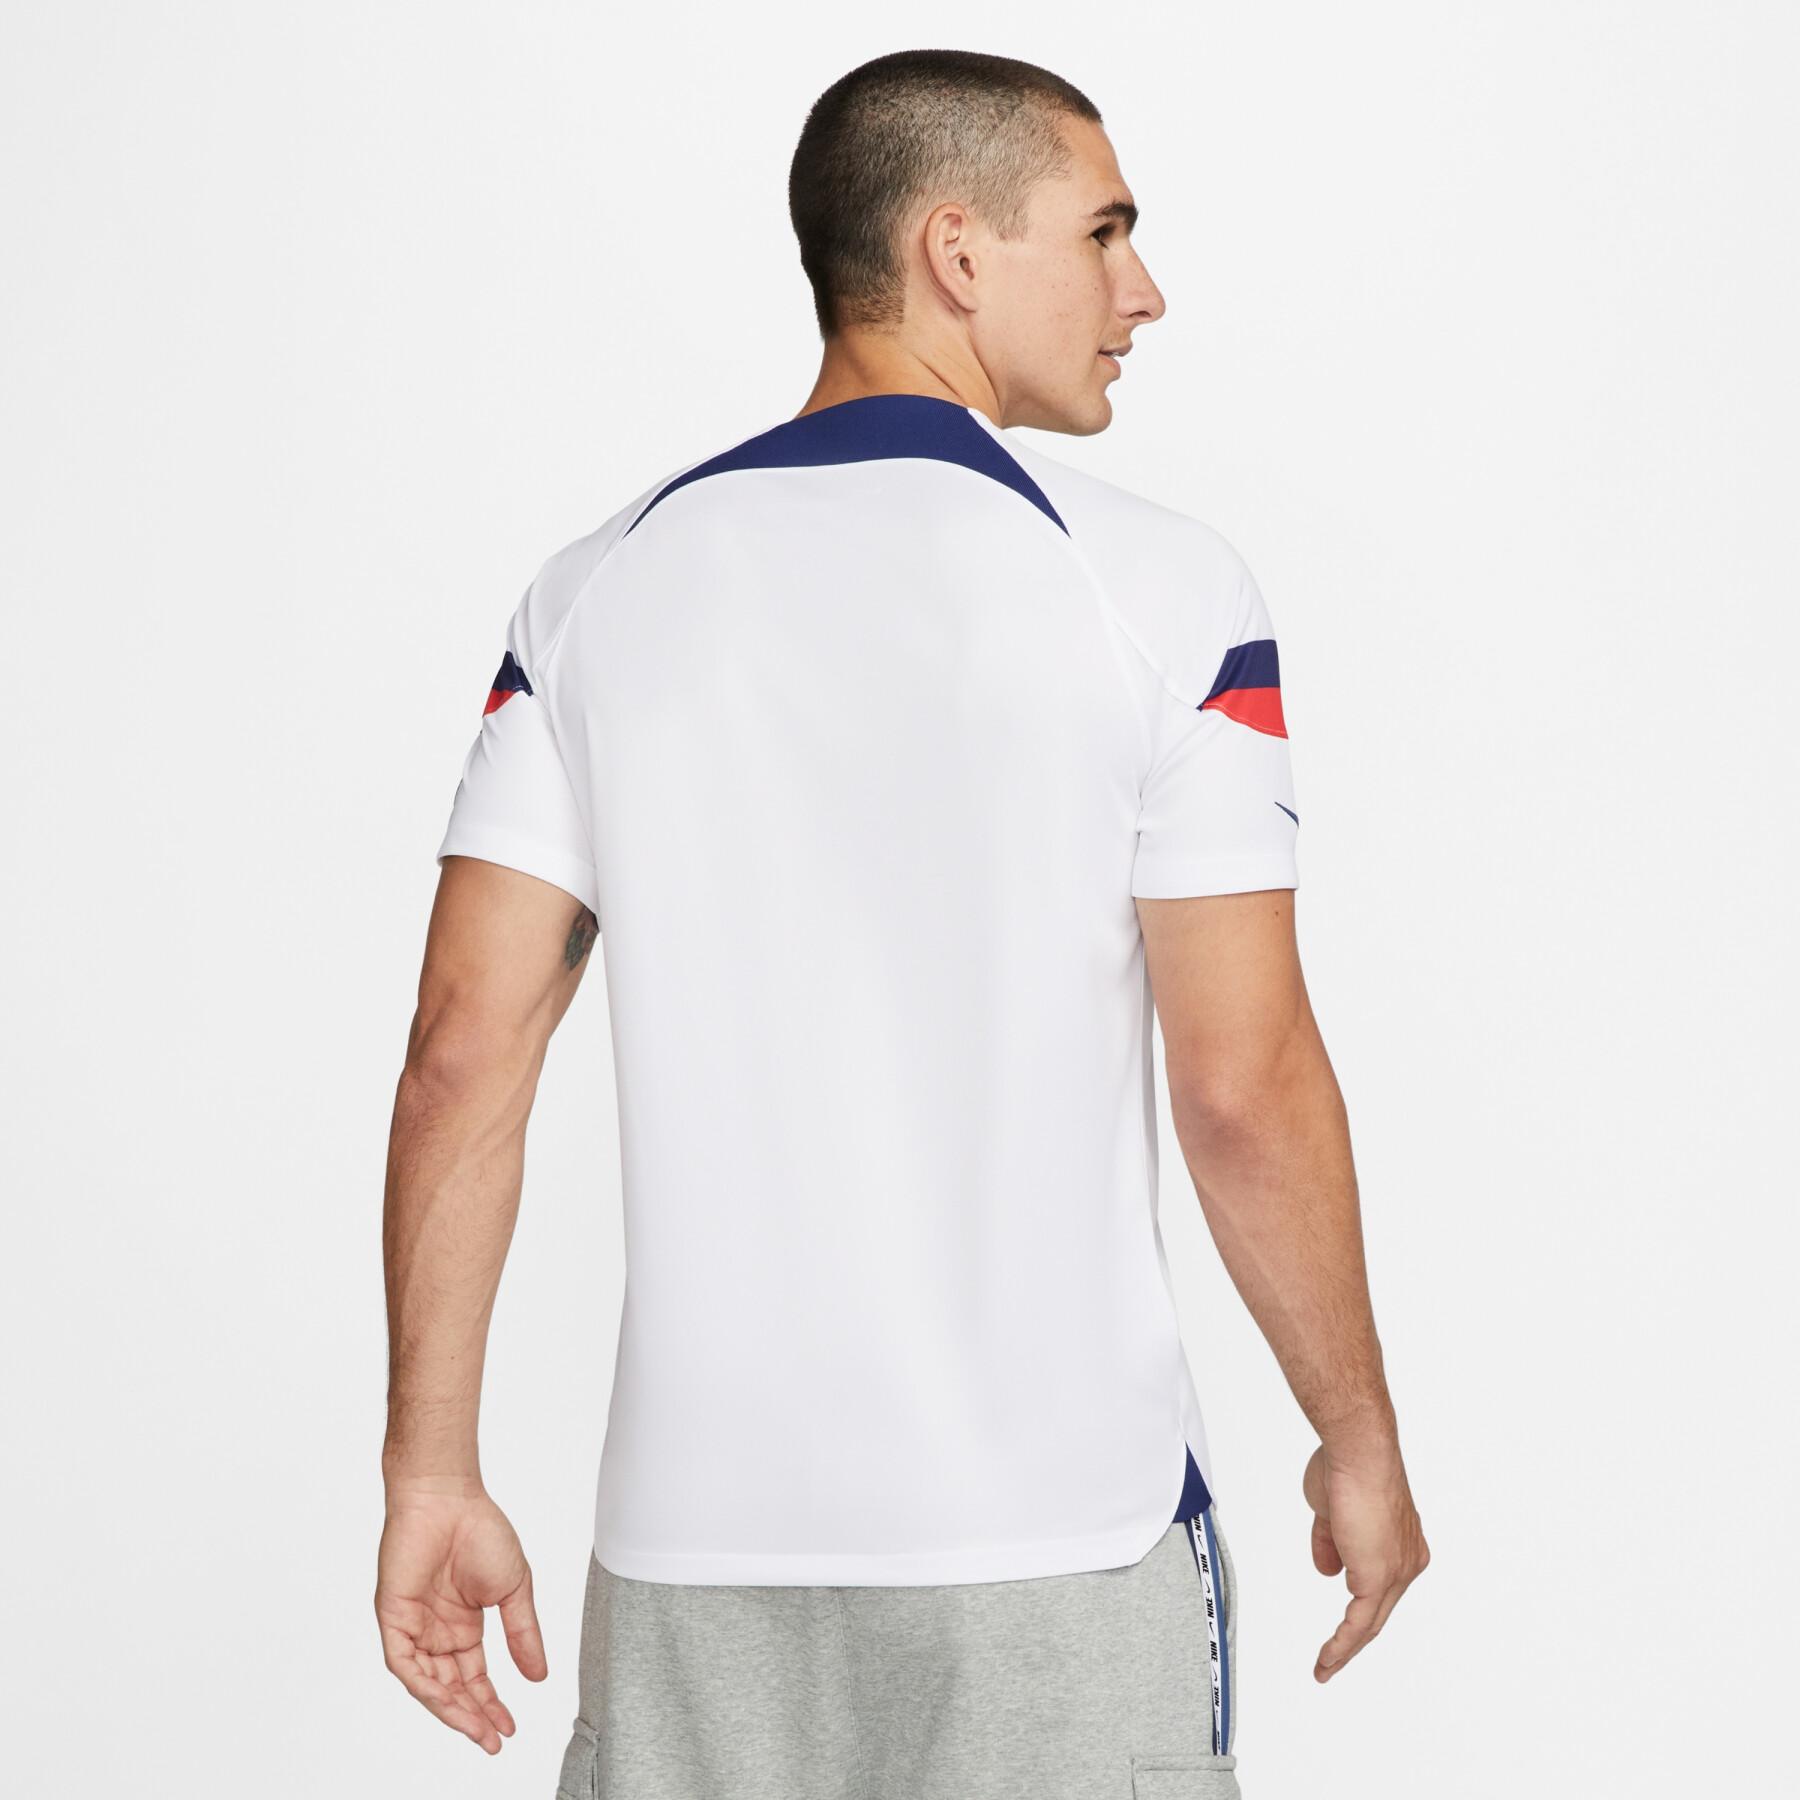 2022 World Cup home jersey USA